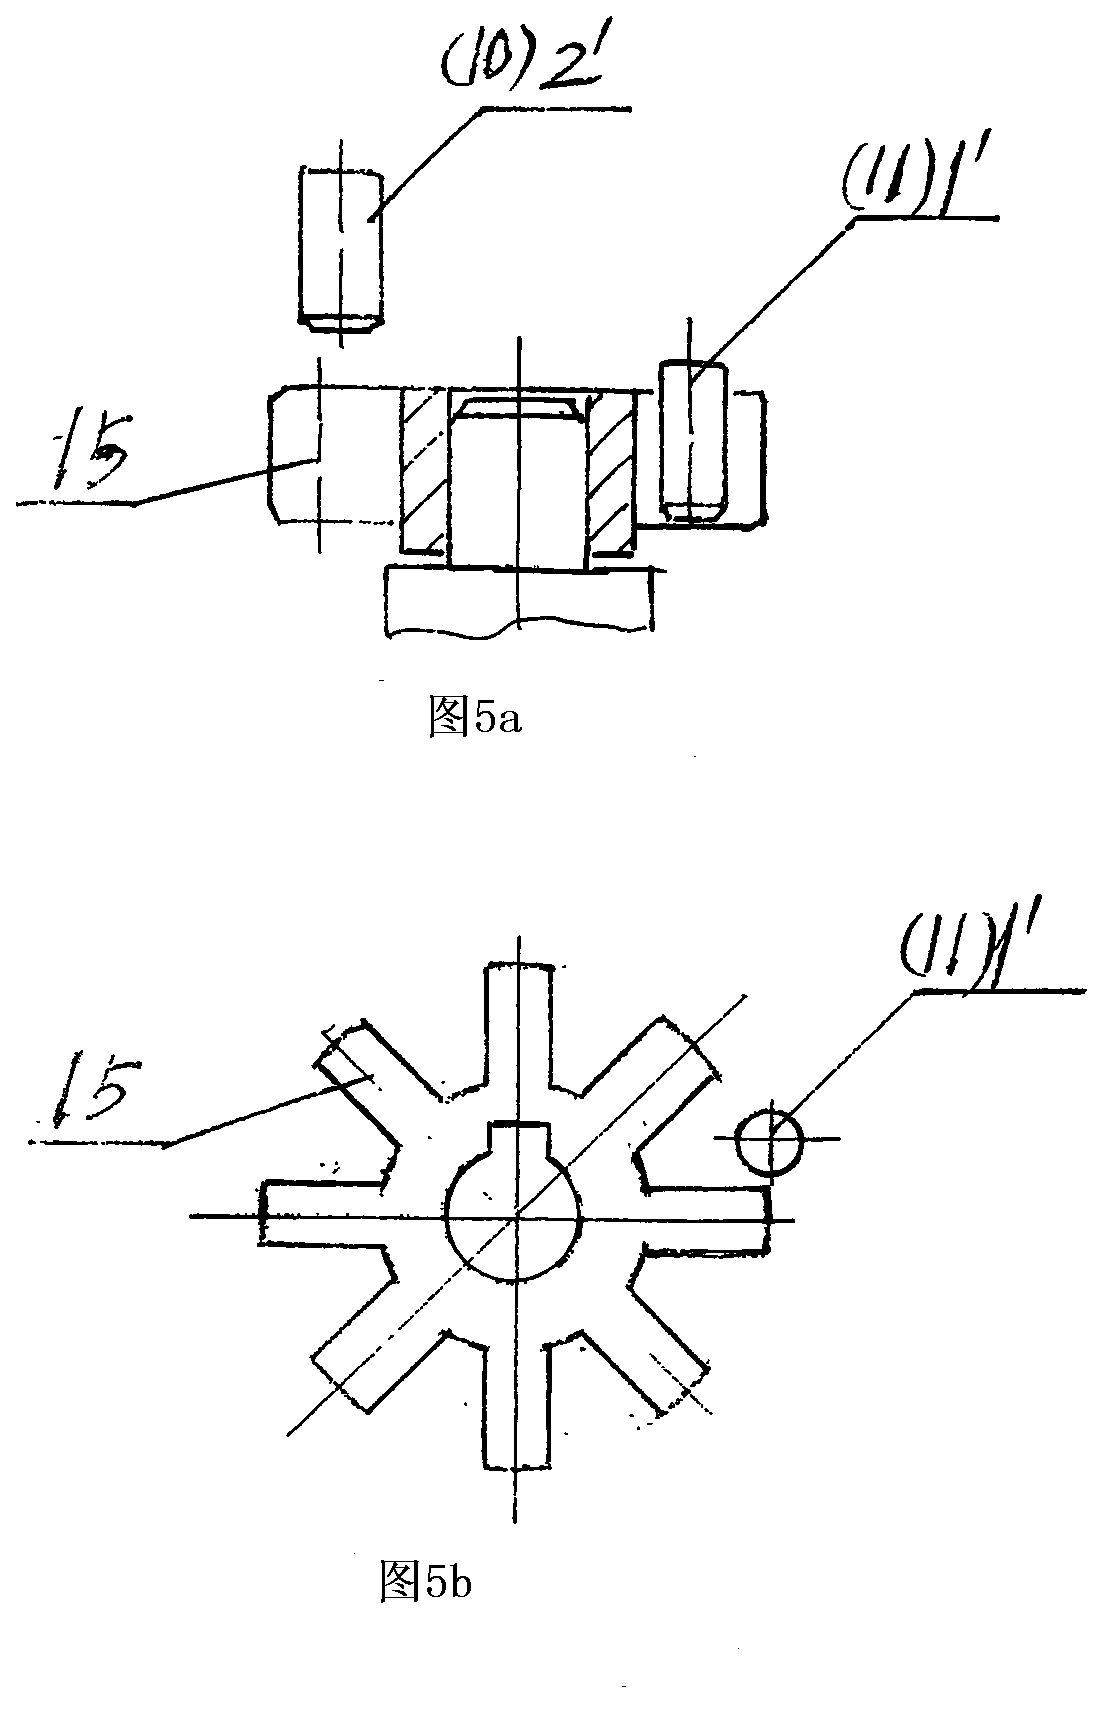 Constant-proportion variable-speed gathering transmission device